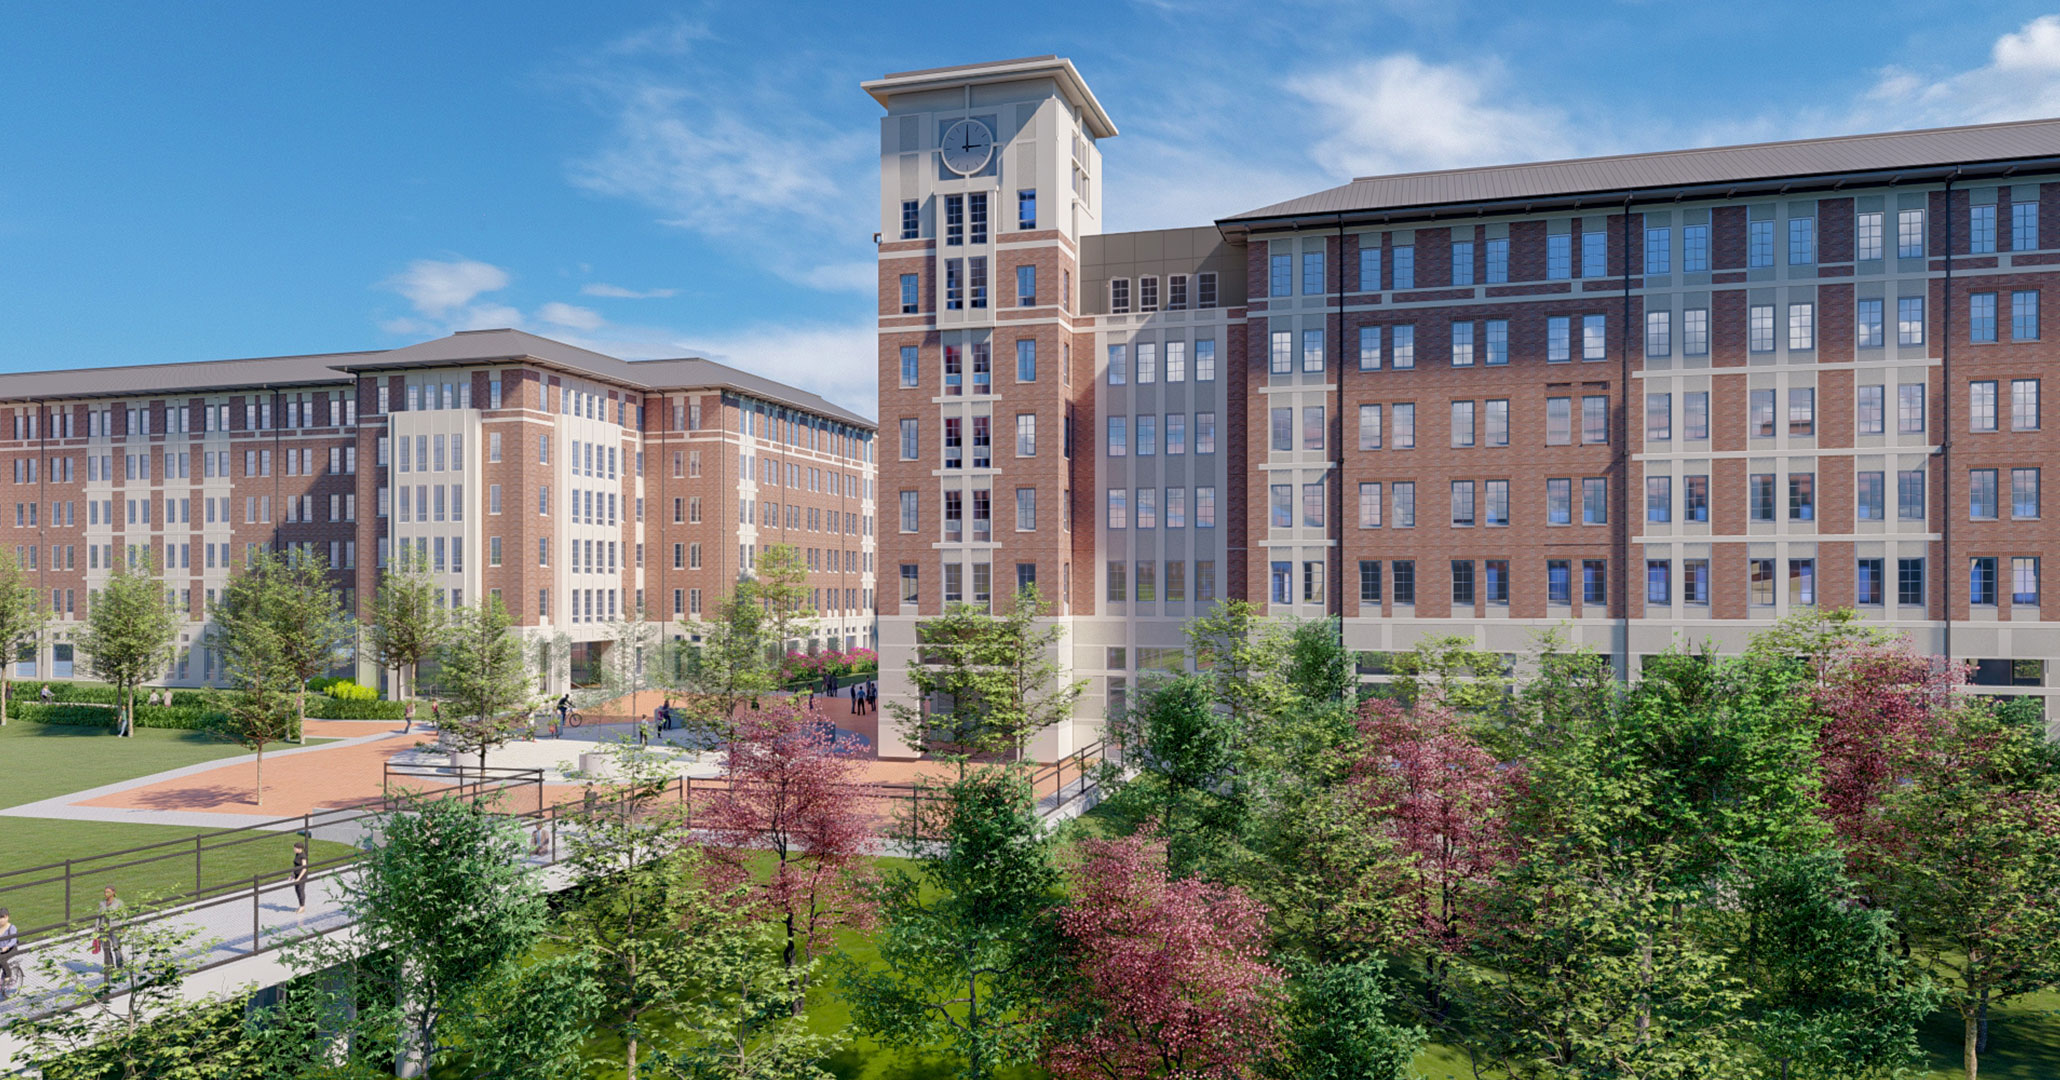 Boudreaux architects is working with University of South Carolina on the new Campus Village development.